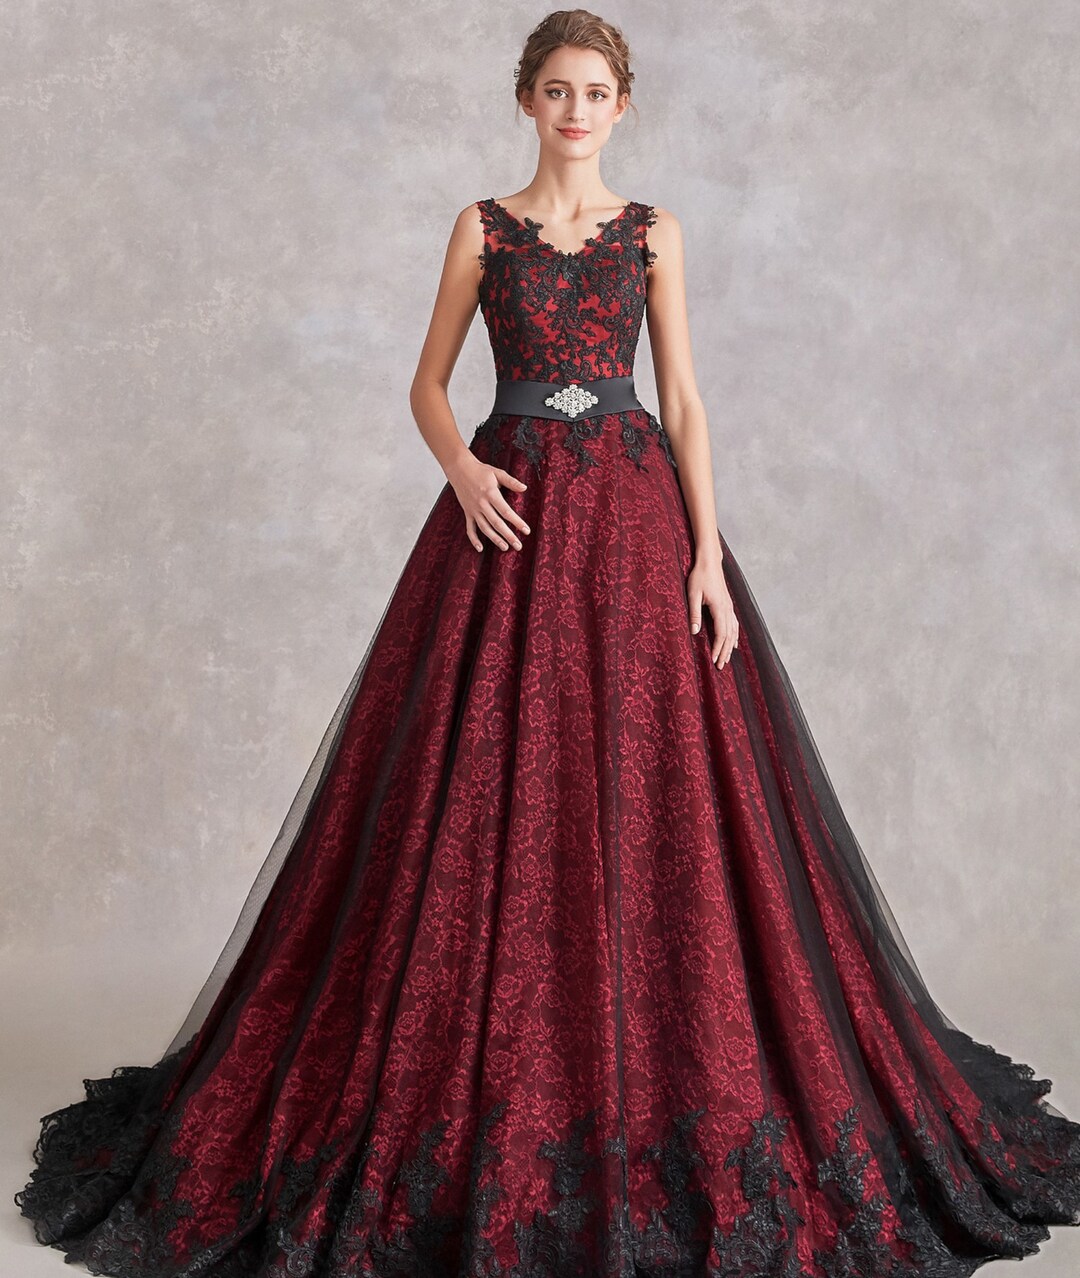 Beautiful Lace Gothic Red and Black Simple Wedding Dress Bridal Gown off  the Shoulder Cap Sleeve A-line 